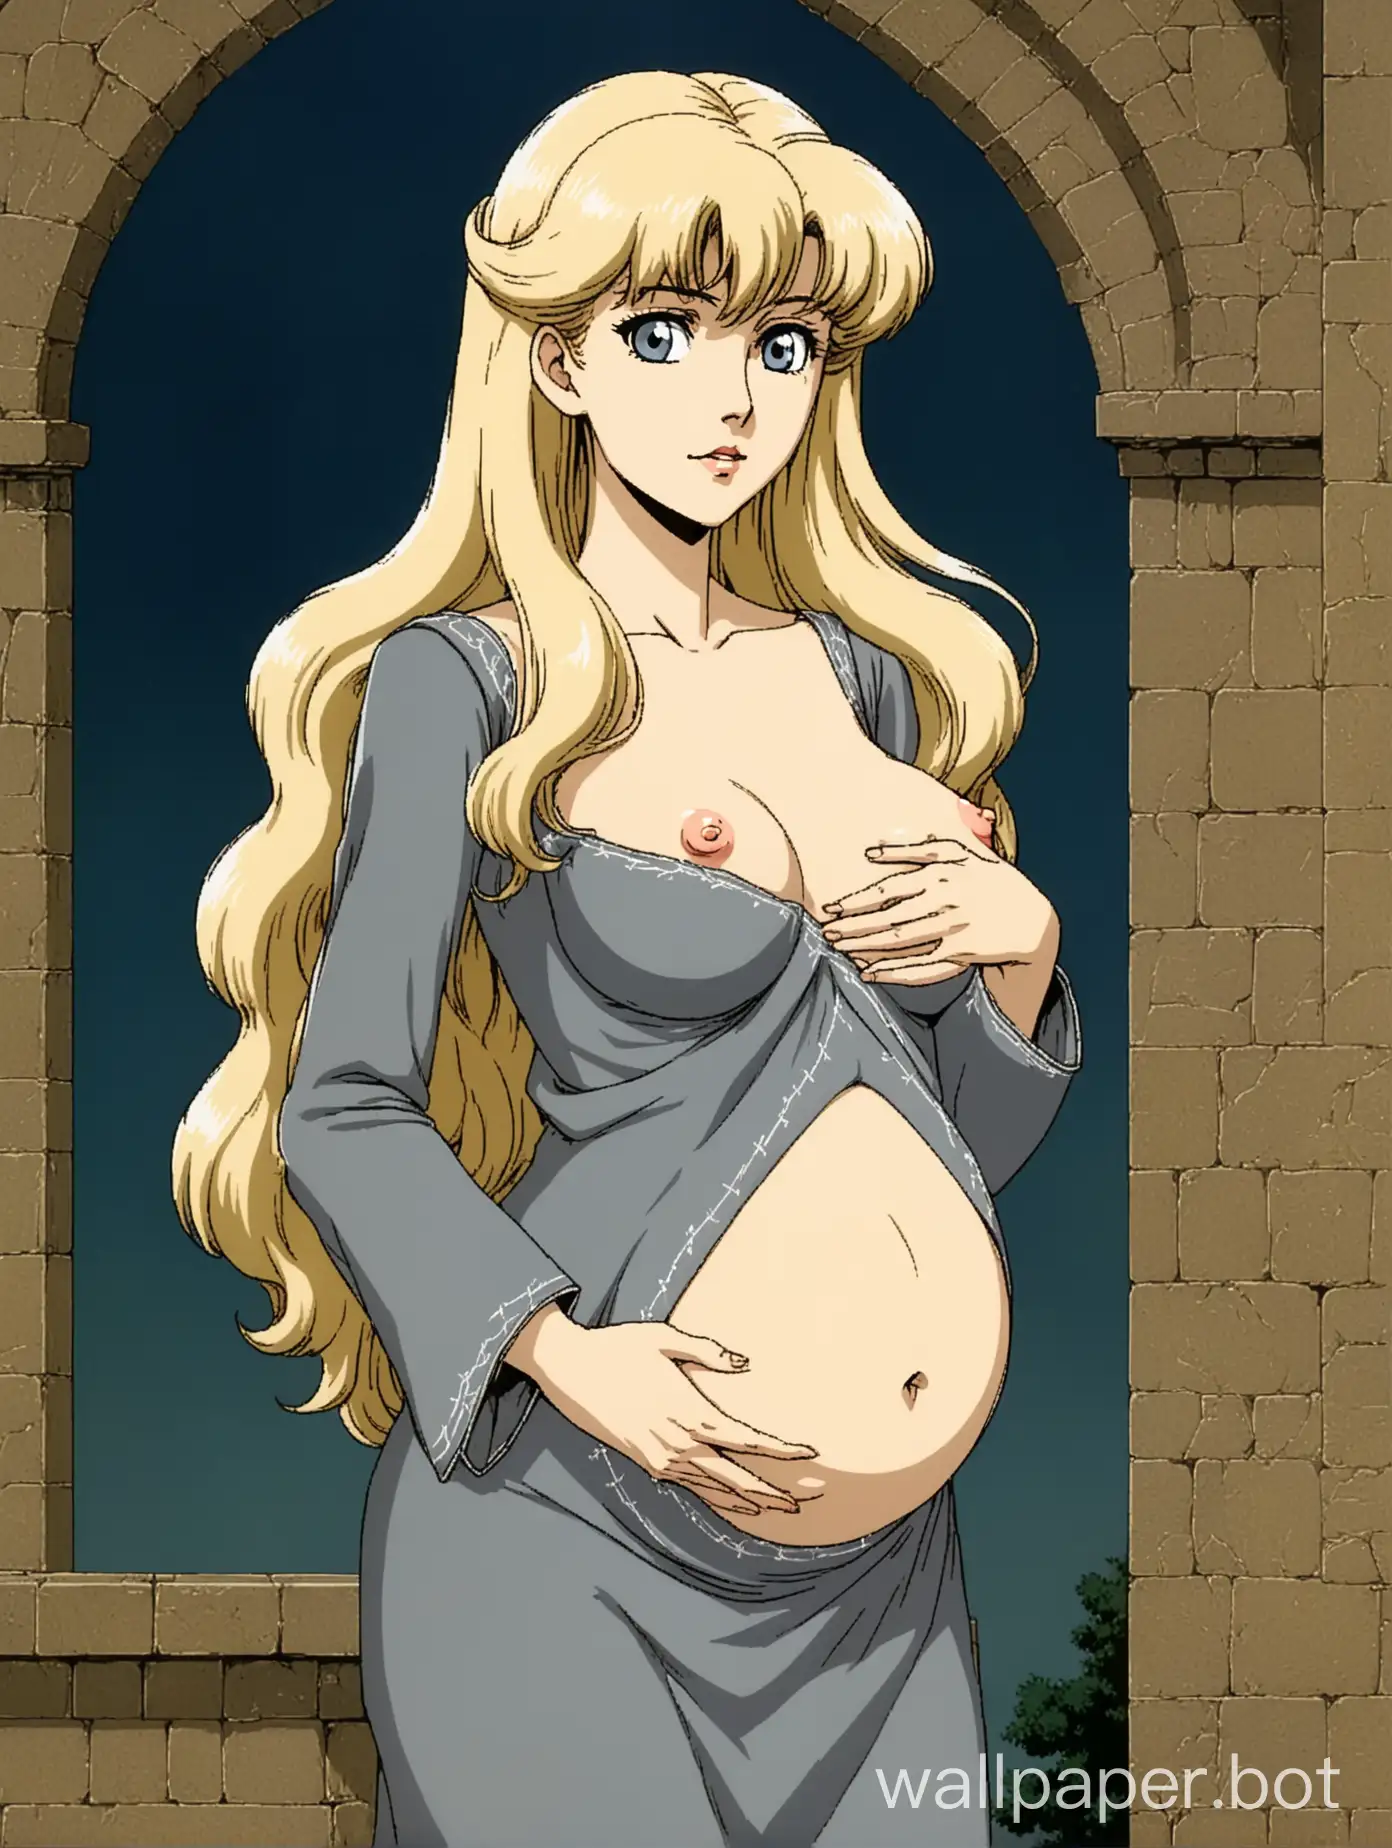 1980s retro anime, portrait of a young and attractive white woman topless, she is pregnant, she has long wavy white-blonde hair, standing regally, elegant and slender, thin sharp face, wearing a thin long dark grey skirt, topless, navel, exposed belly, gorgeous breasts, perky nipples, topless, decorative stitching, medieval elegance, 1980s retro anime